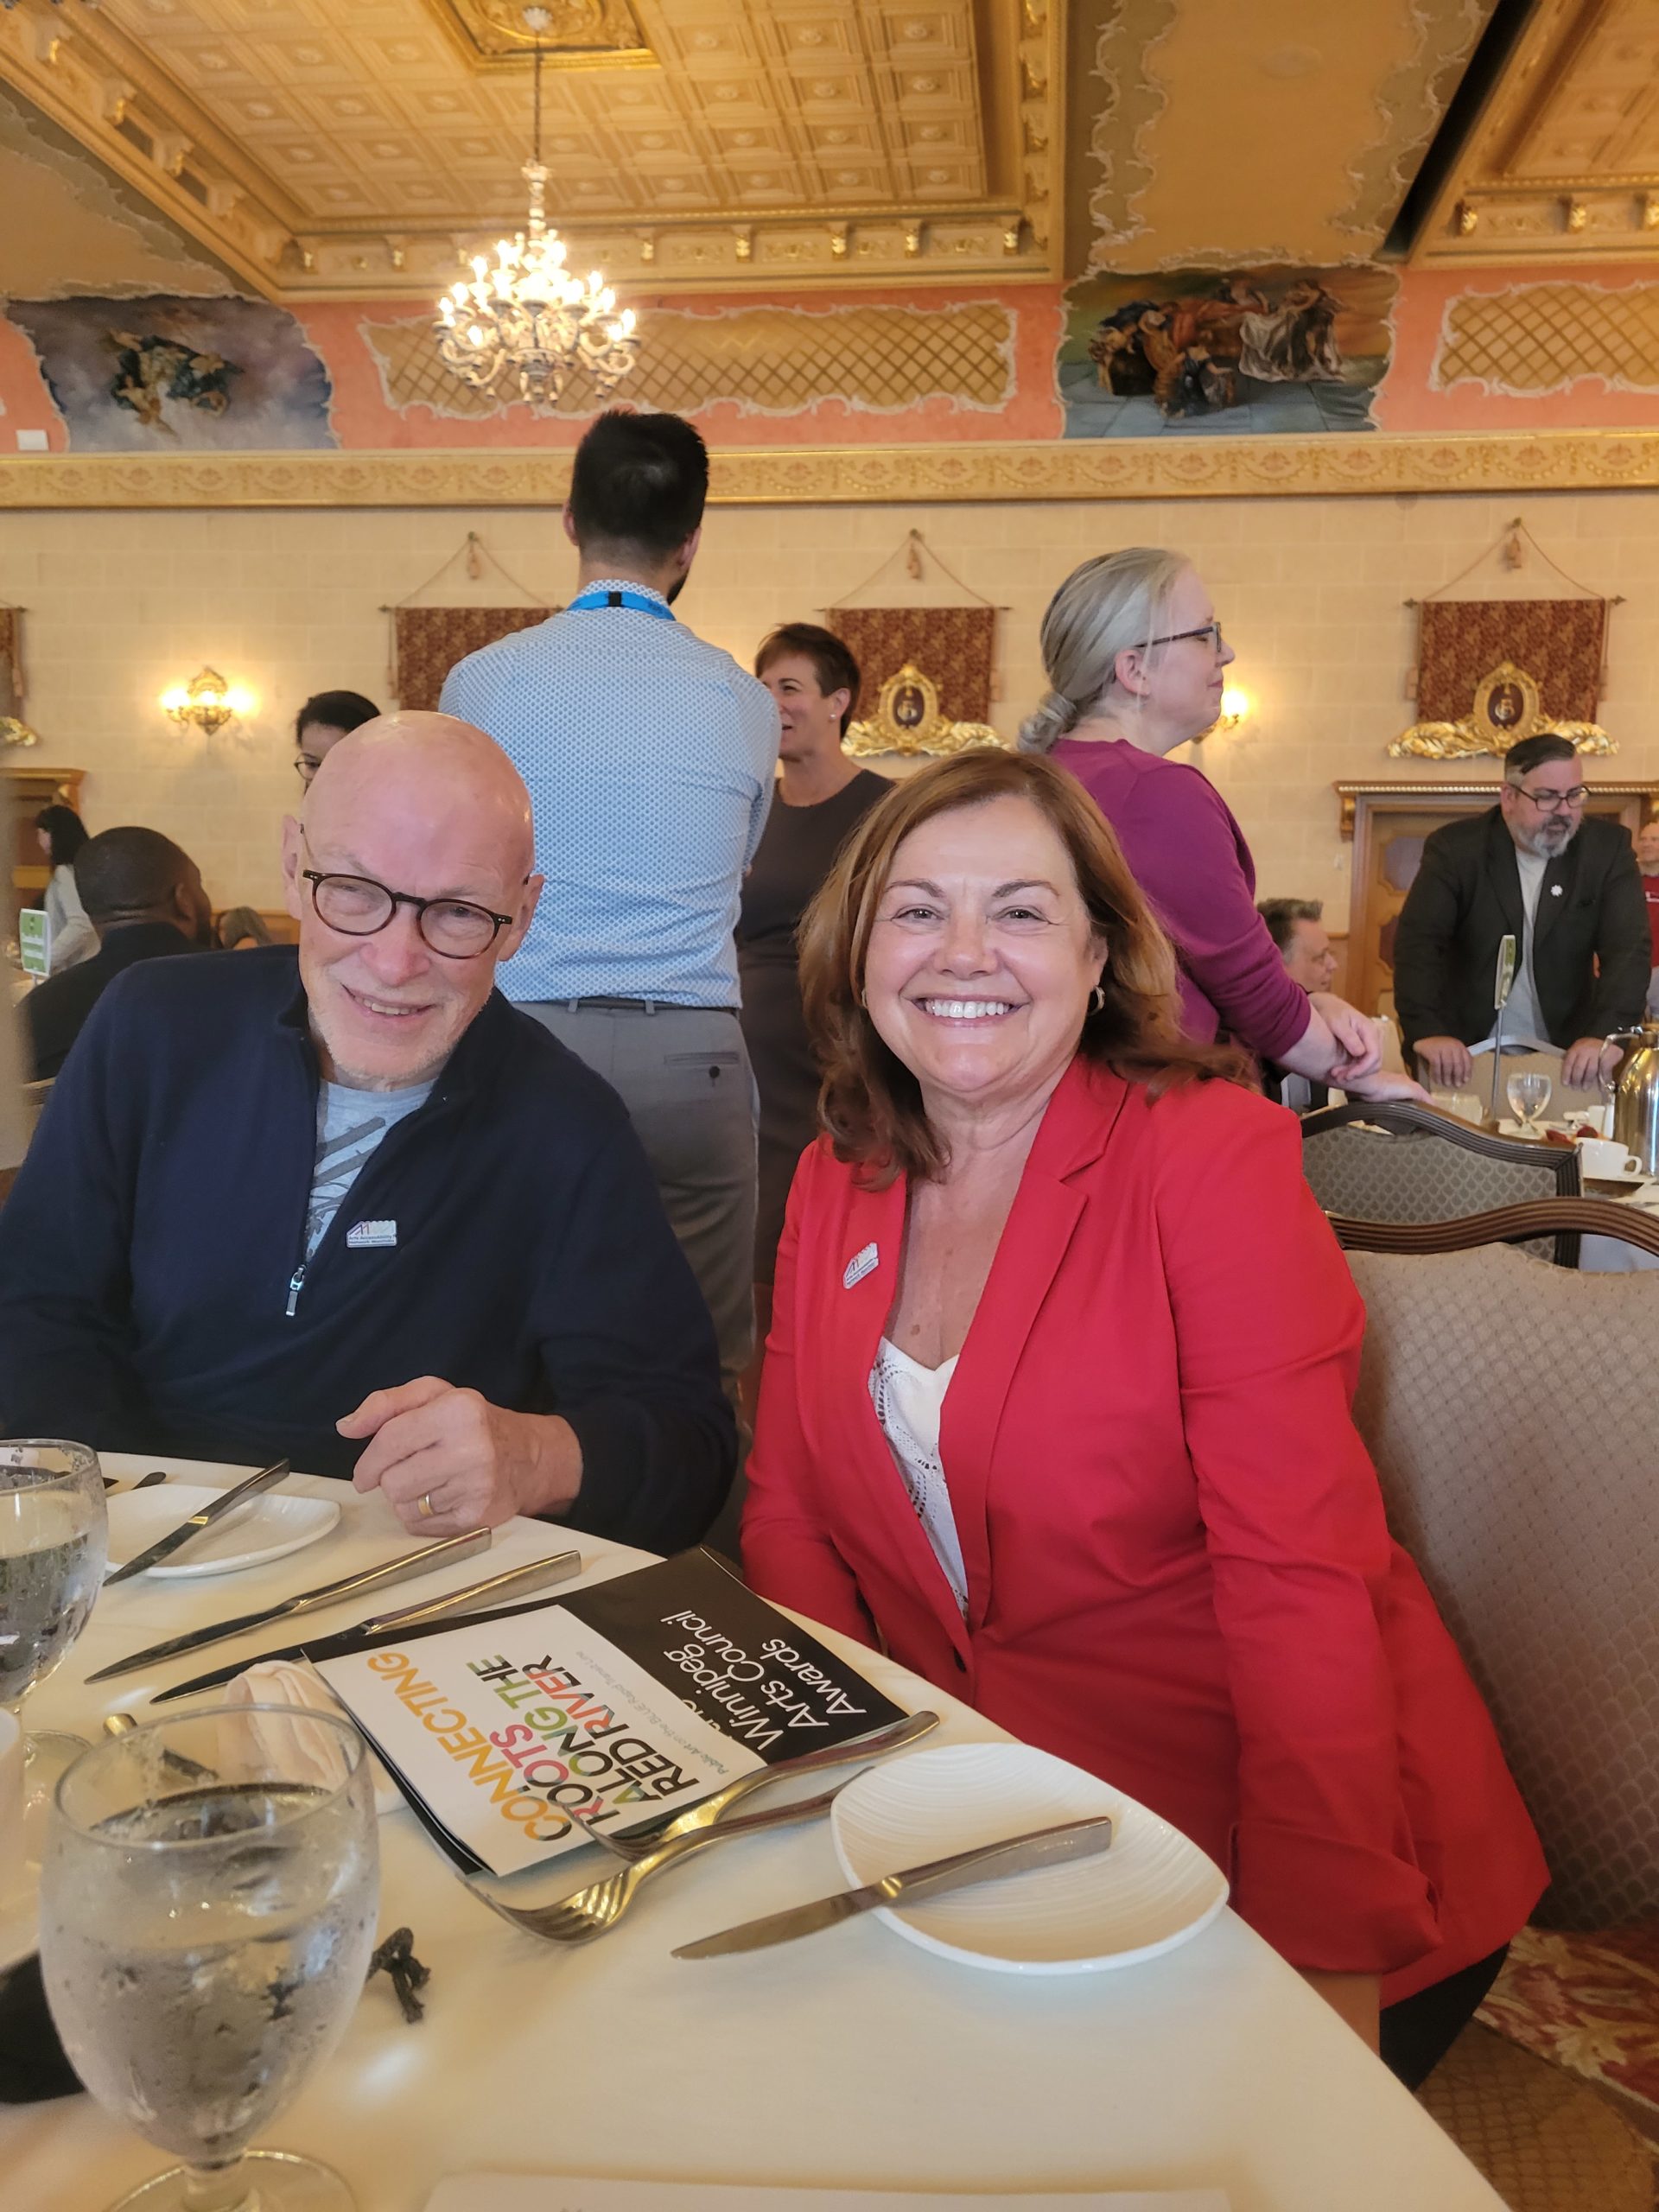 this is a photograph of Ted Howorth and Marie Bouchard. Ted is a white man in his 60s who is bald and black framed glasses. He is wearing a blue zip up sweater. Marie is a white woman in her 50s with shoulder length light brown hair. She is wearing a red blazer over a white t-shirt. They are both smiling at the camera. In the background you can see many tables and other folks who attended the event. The space is very fancy with chandeliers and a goldish ceiling.